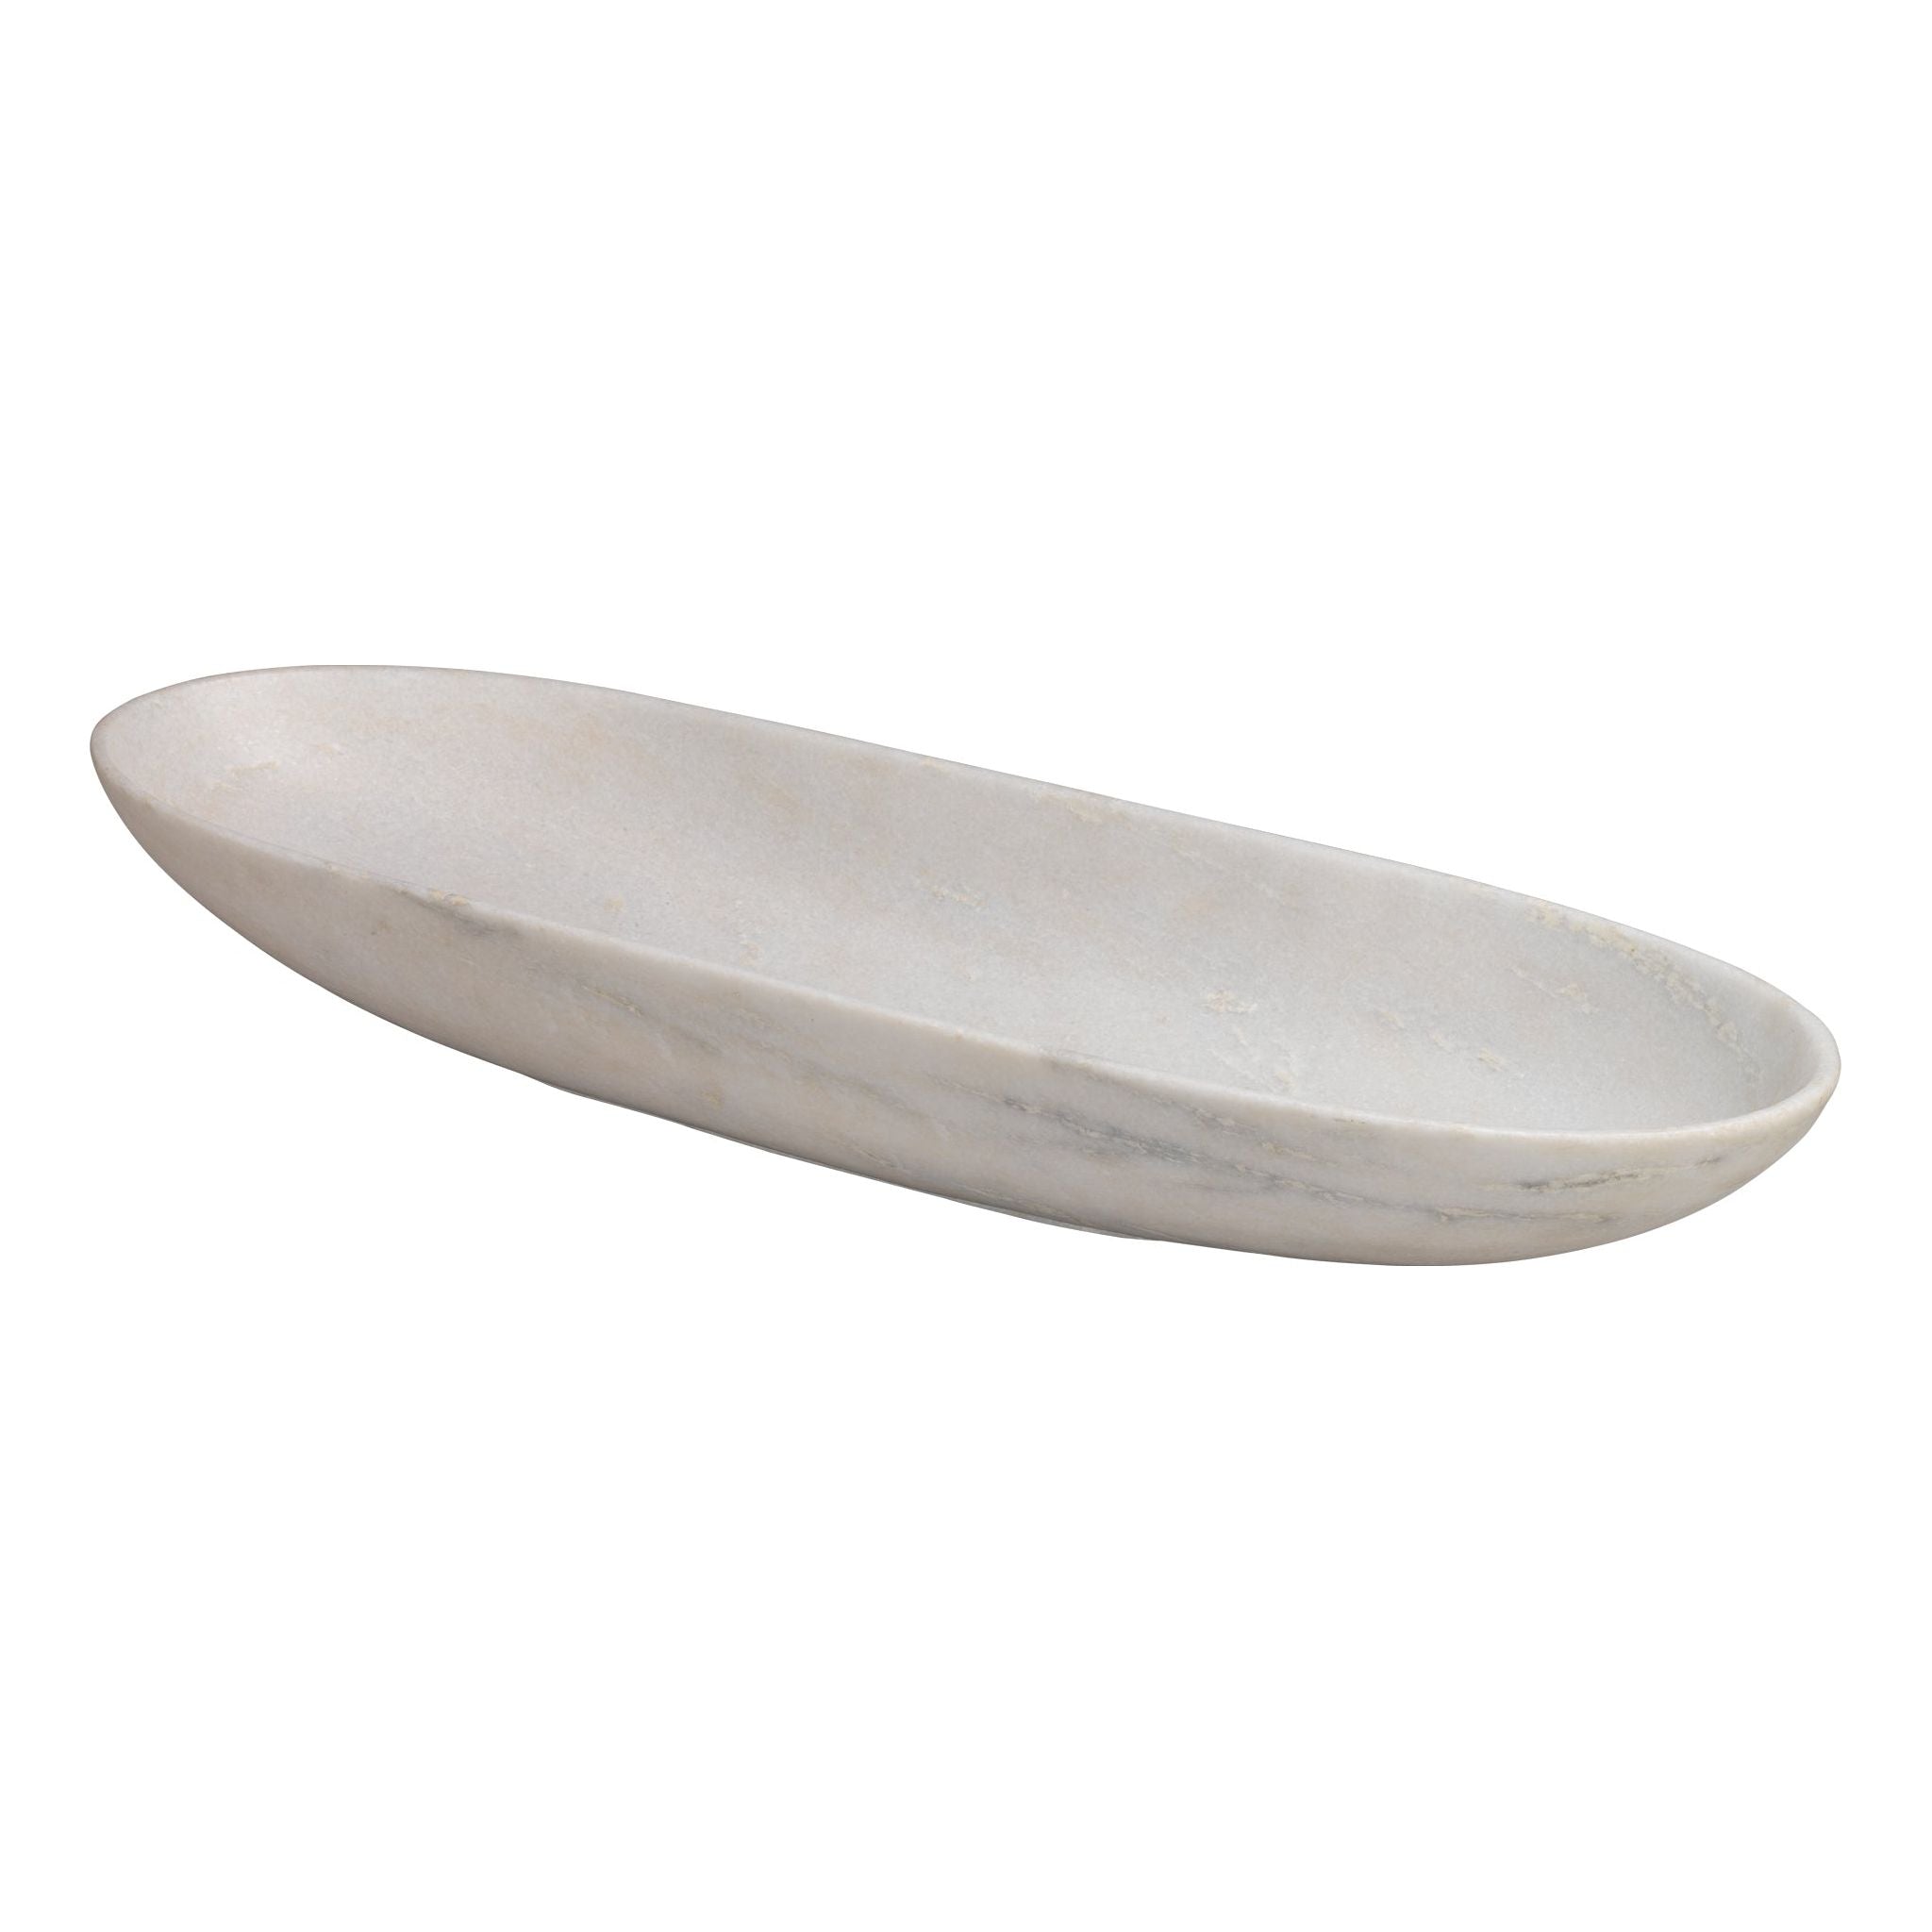 Jamie Young Company - 7LONG-BOWH - Long Oval Marble Bowl - Long - White